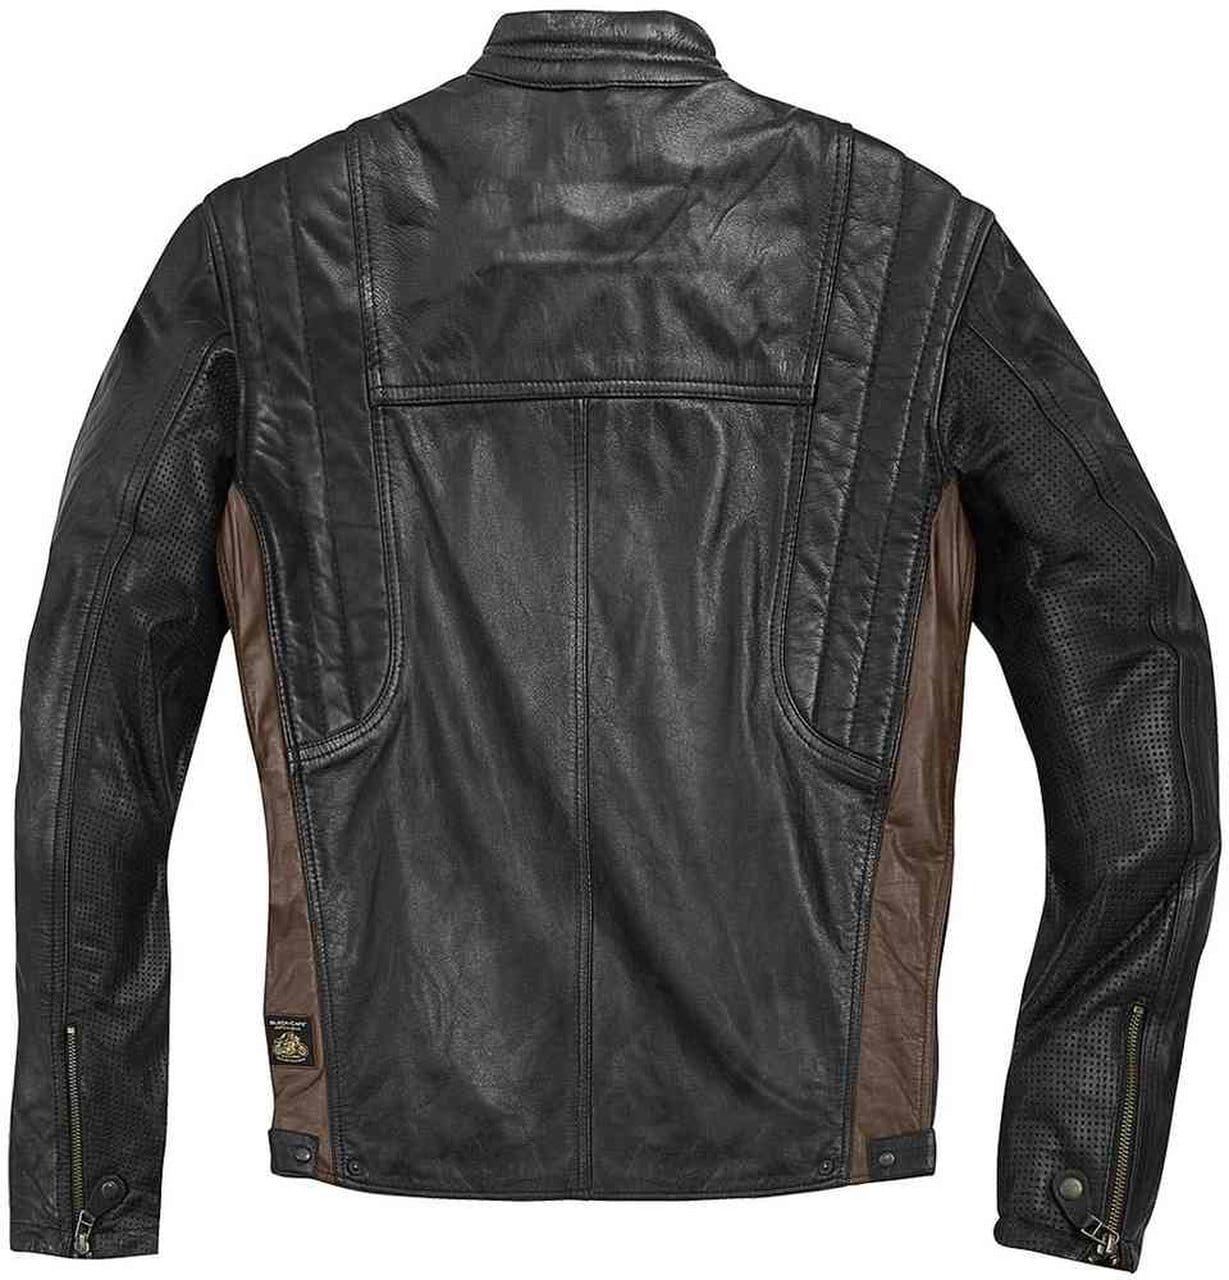 Smart And Stylish Motocycle Leather Jacket For Men In Brown